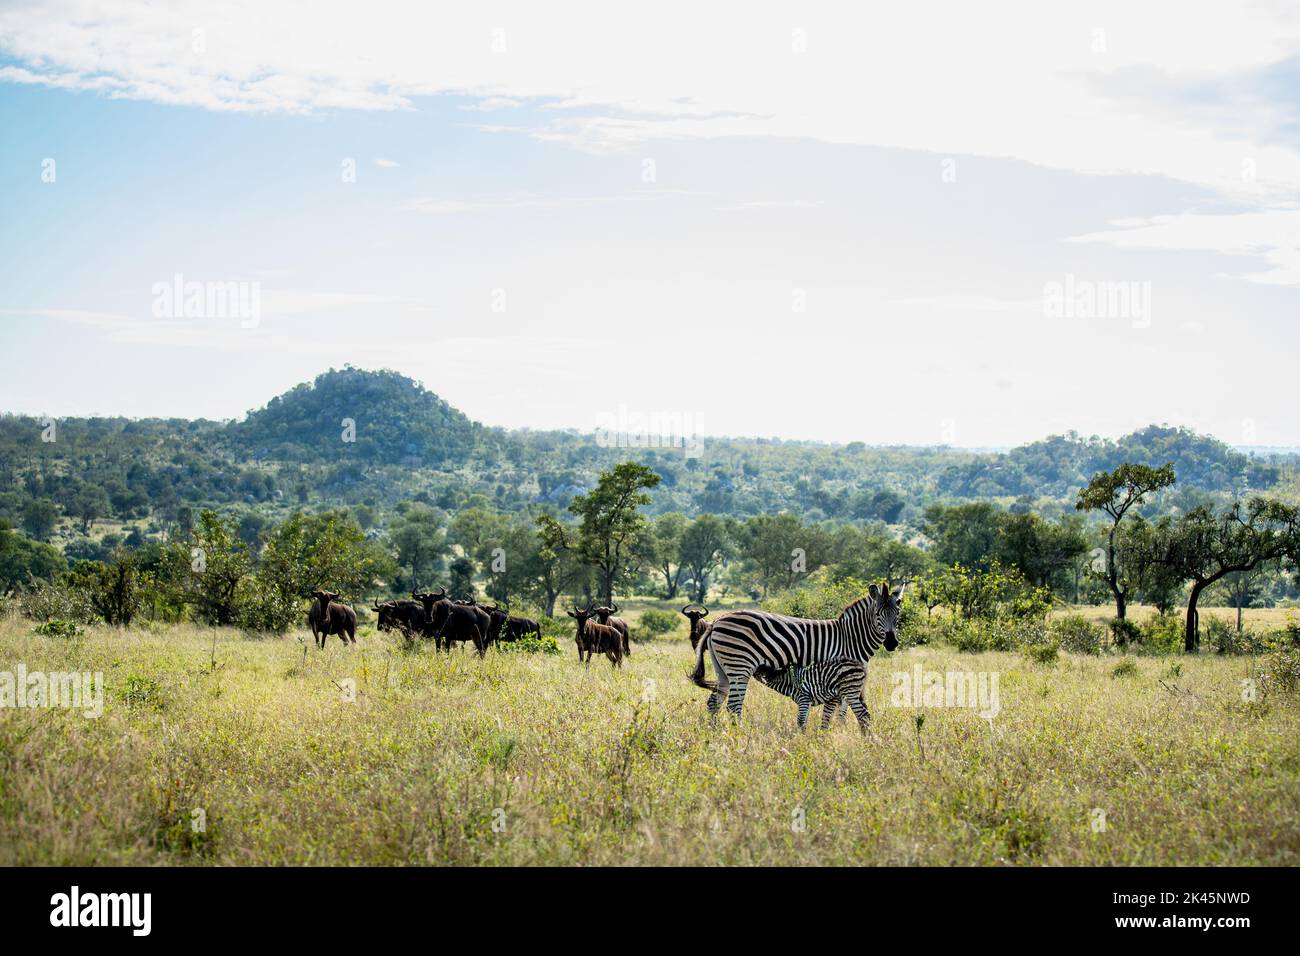 A female zebra and her baby nursing, Equus quagga, with Wildebest, Connochaetes , in the backround. Stock Photo